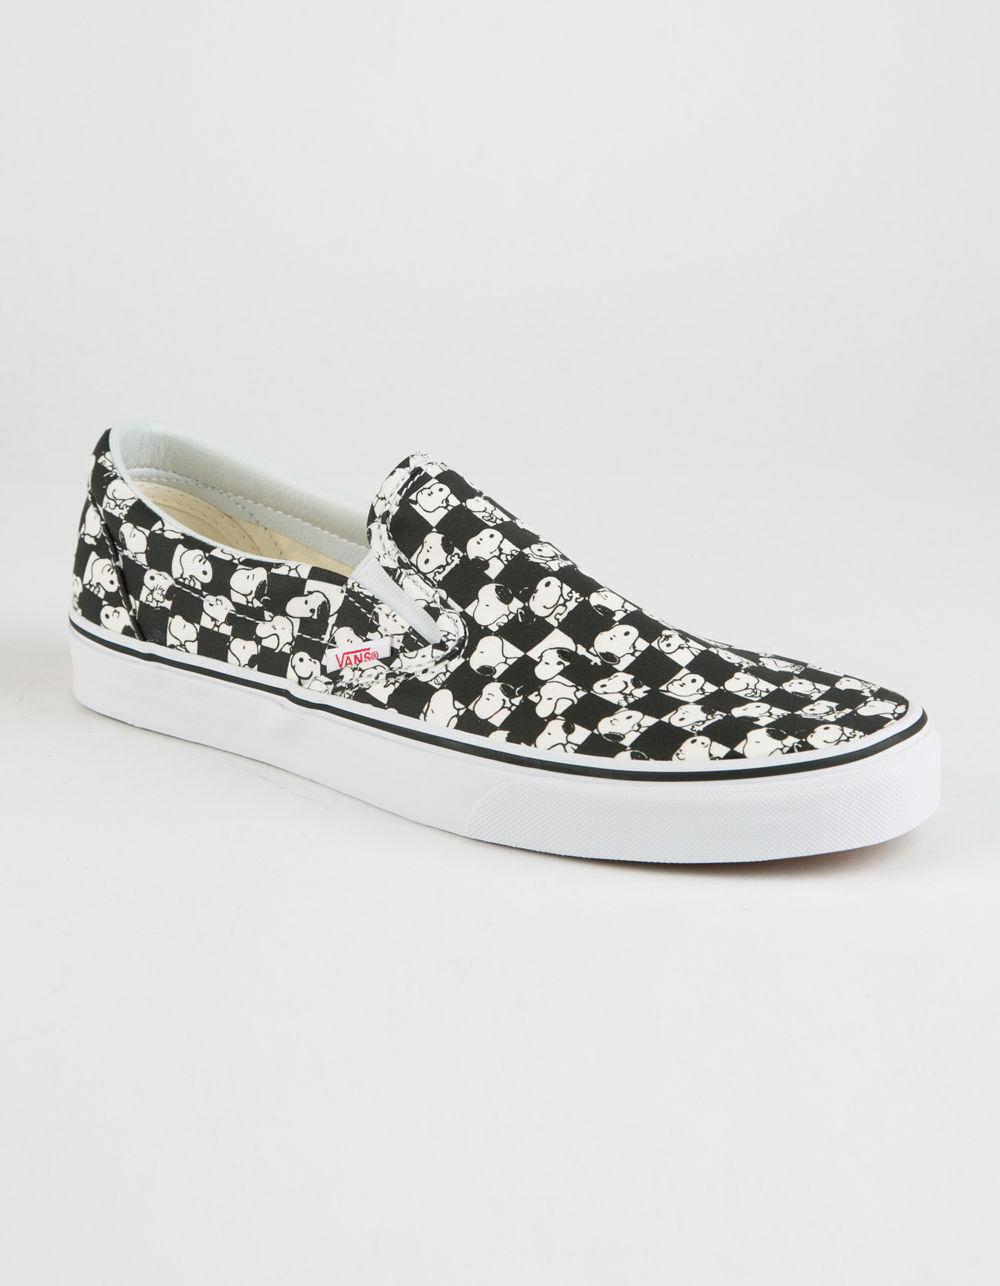 Vans Canvas X Peanuts Snoopy Checkerboard Classic Slip-on Shoes - Lyst